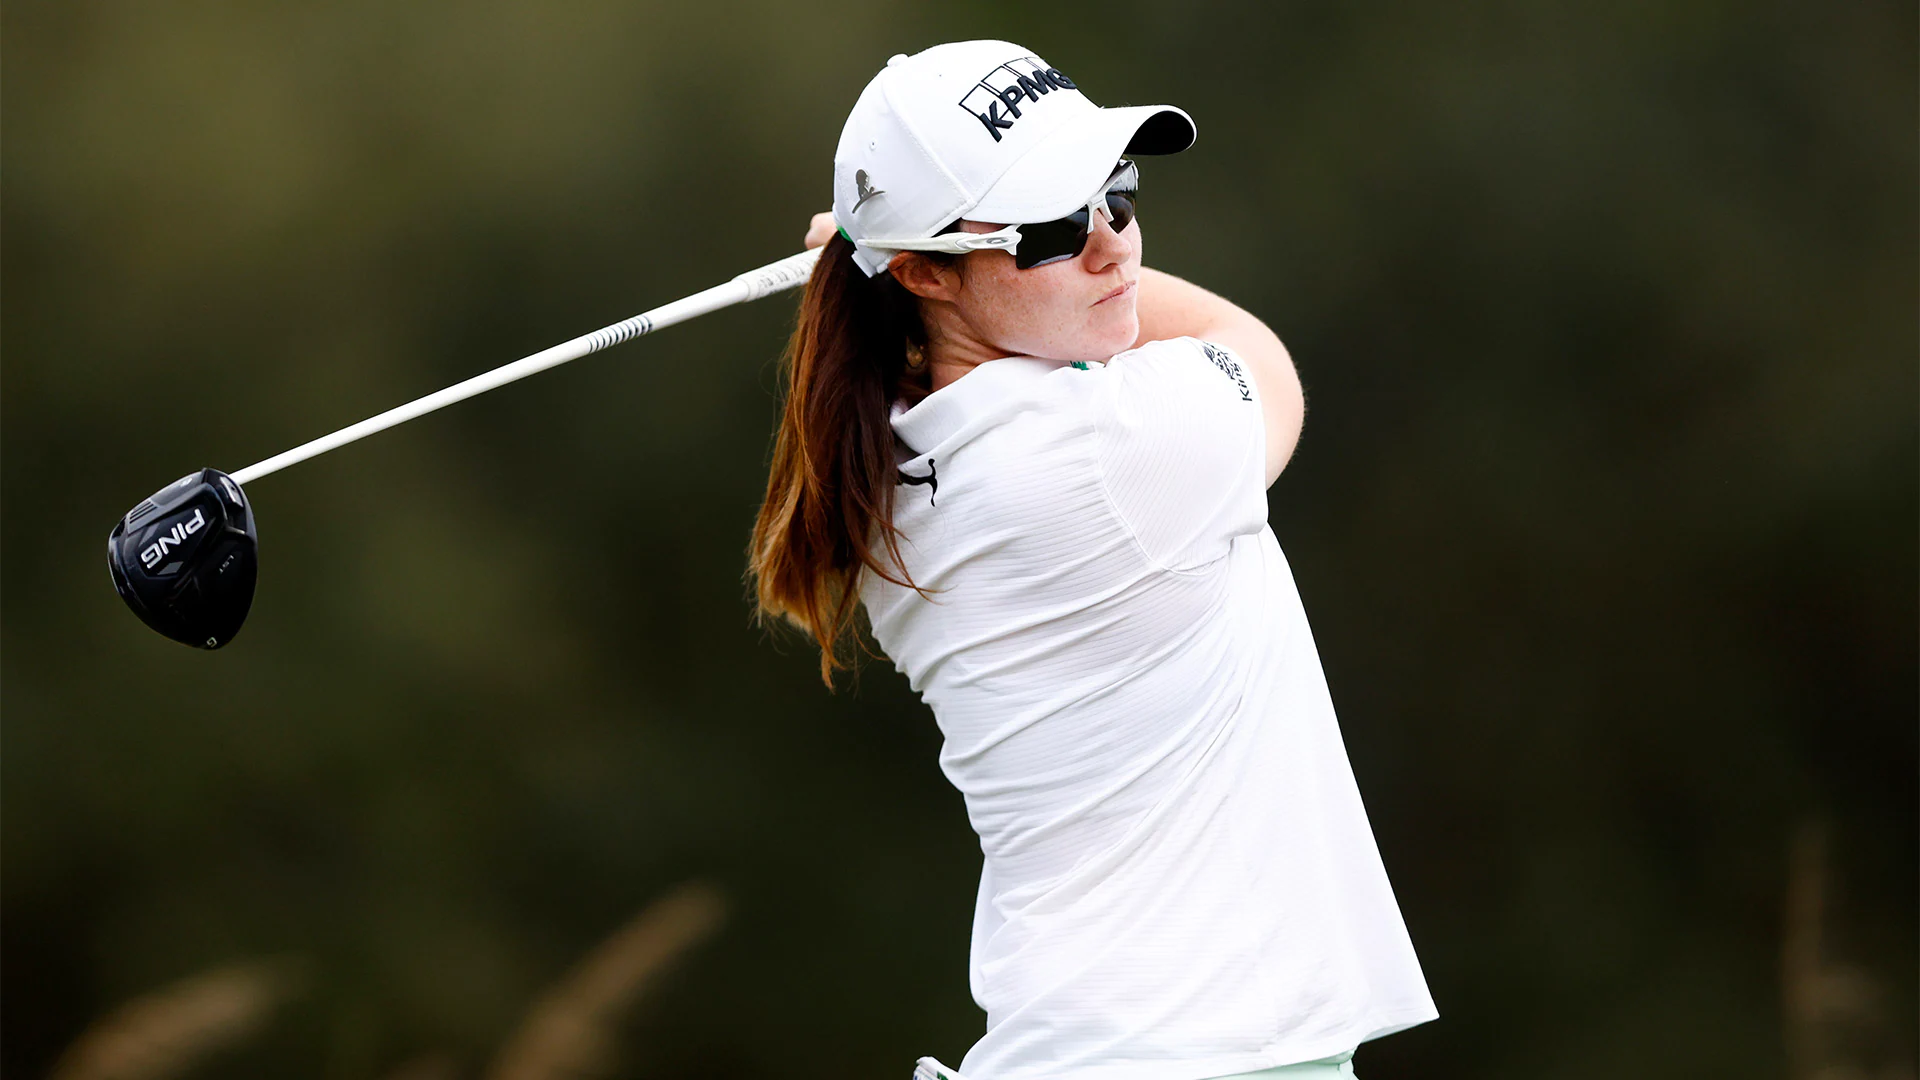 Leona Maguire has shot at CME Globe Champ. to wrap up illustrious rookie year